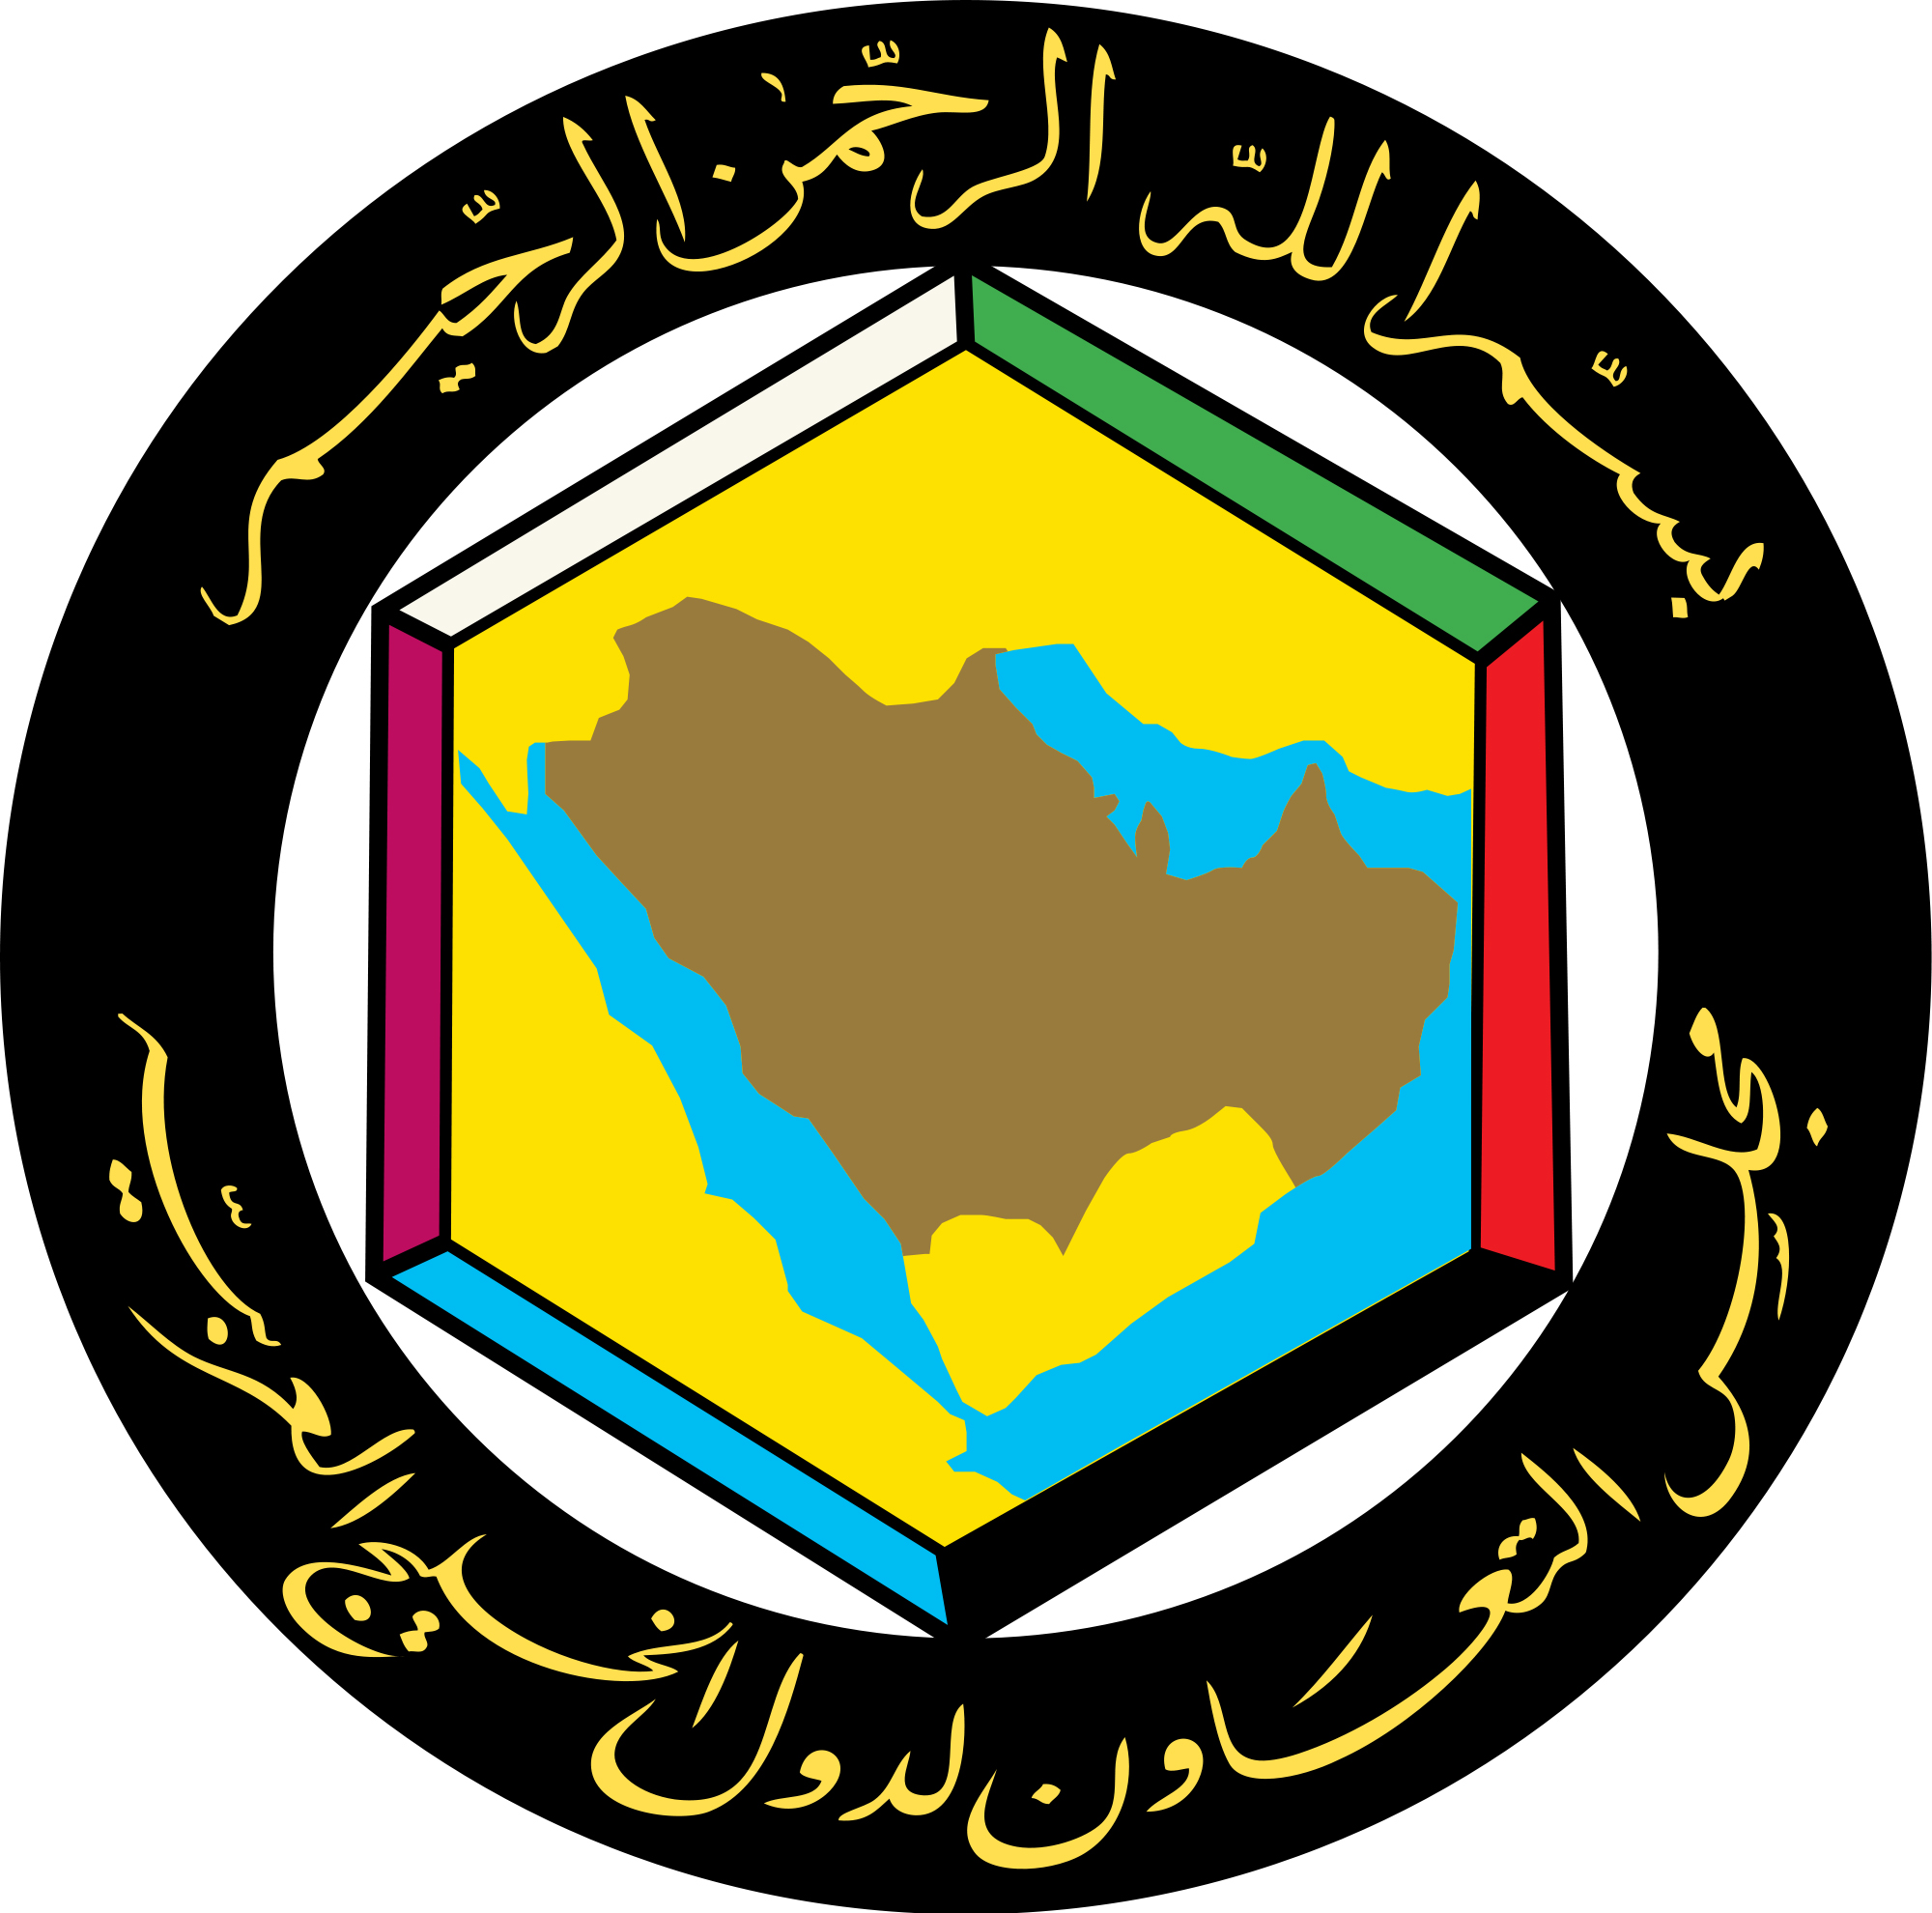 The Gulf Cooperation Council (GCC)